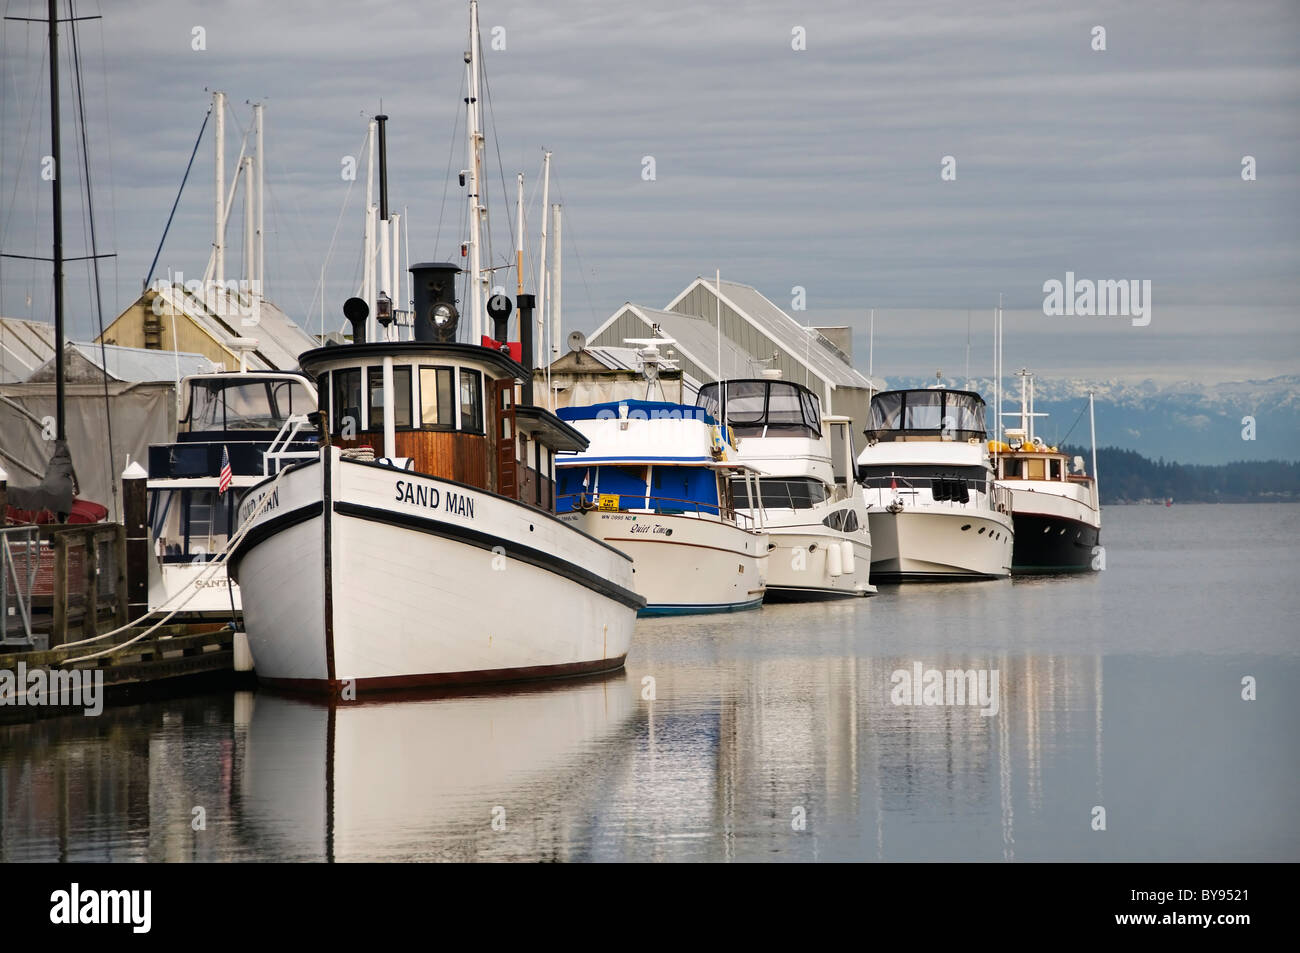 The restored historical tugboat Sand Man and modern yachts are moored in Budd Bay during an extreme king tide in Olympia. Stock Photo